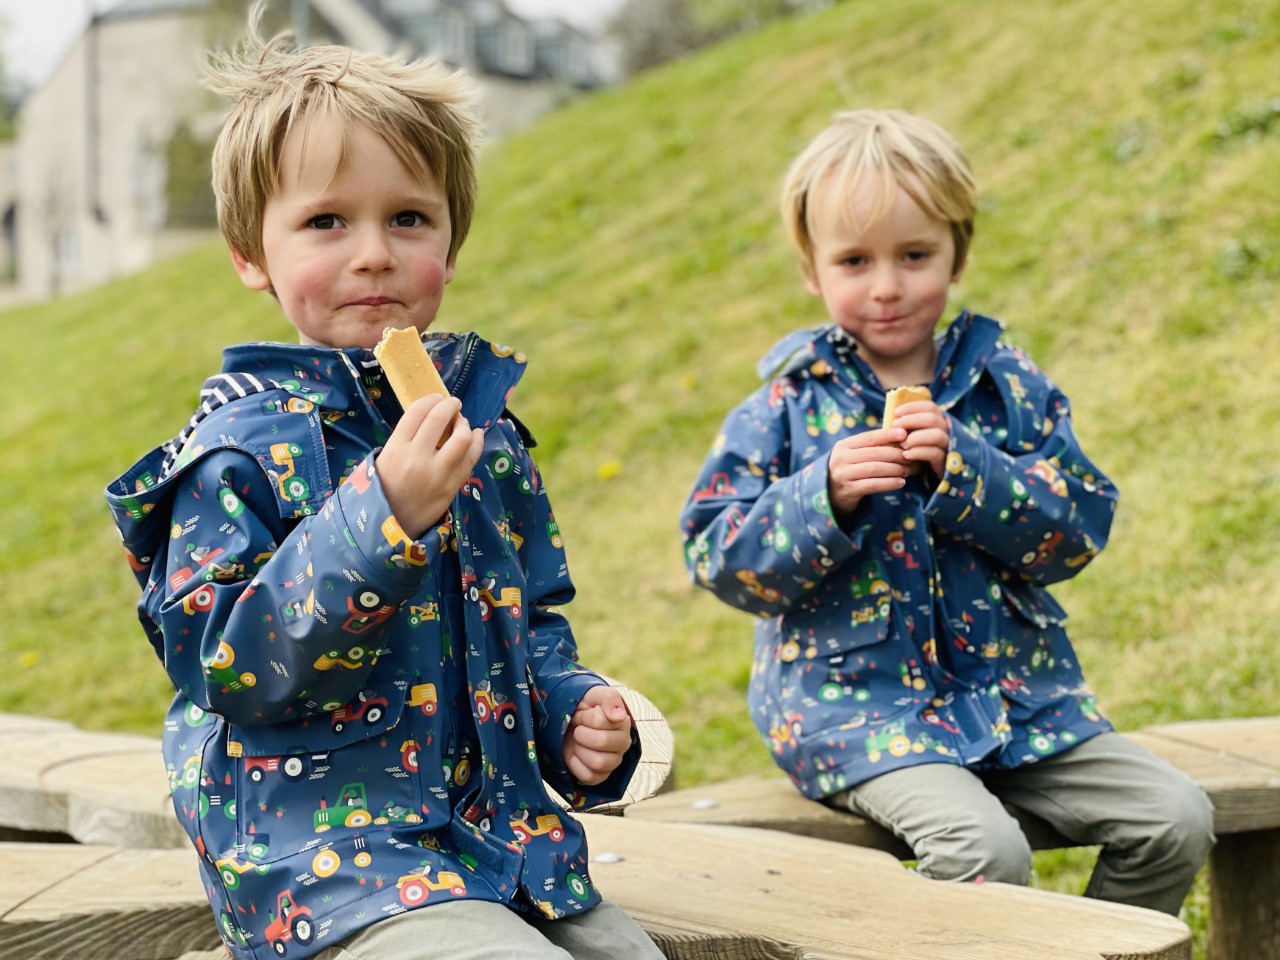 Potty training twins - 10 tips on how I did it with my boys